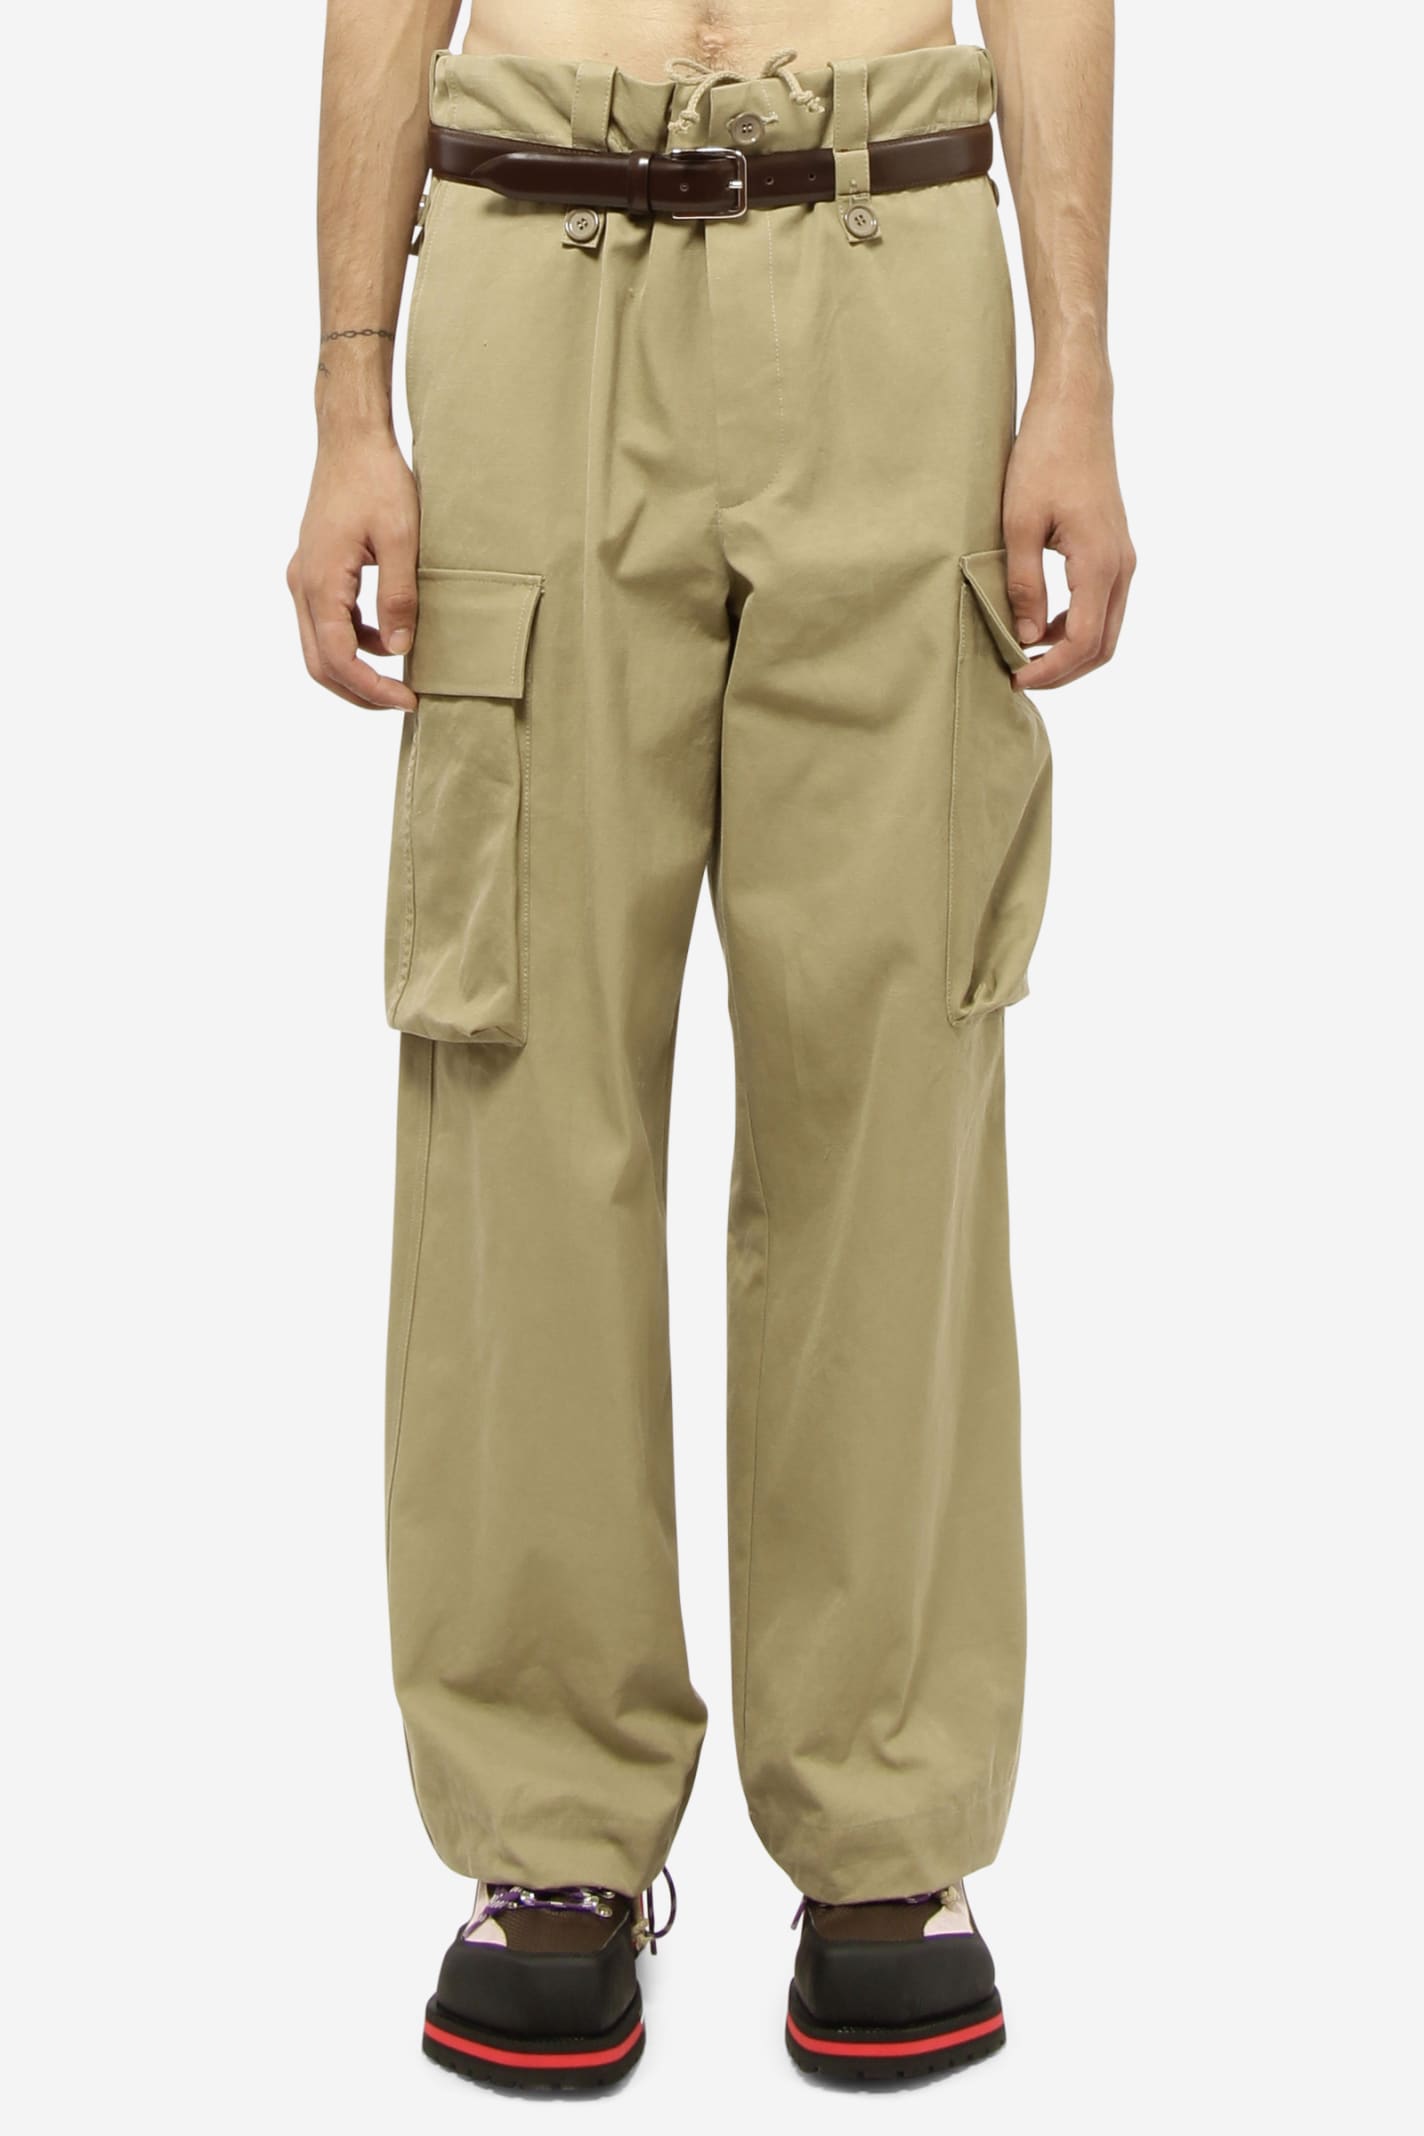 Magliano Beuys Cargo Pants